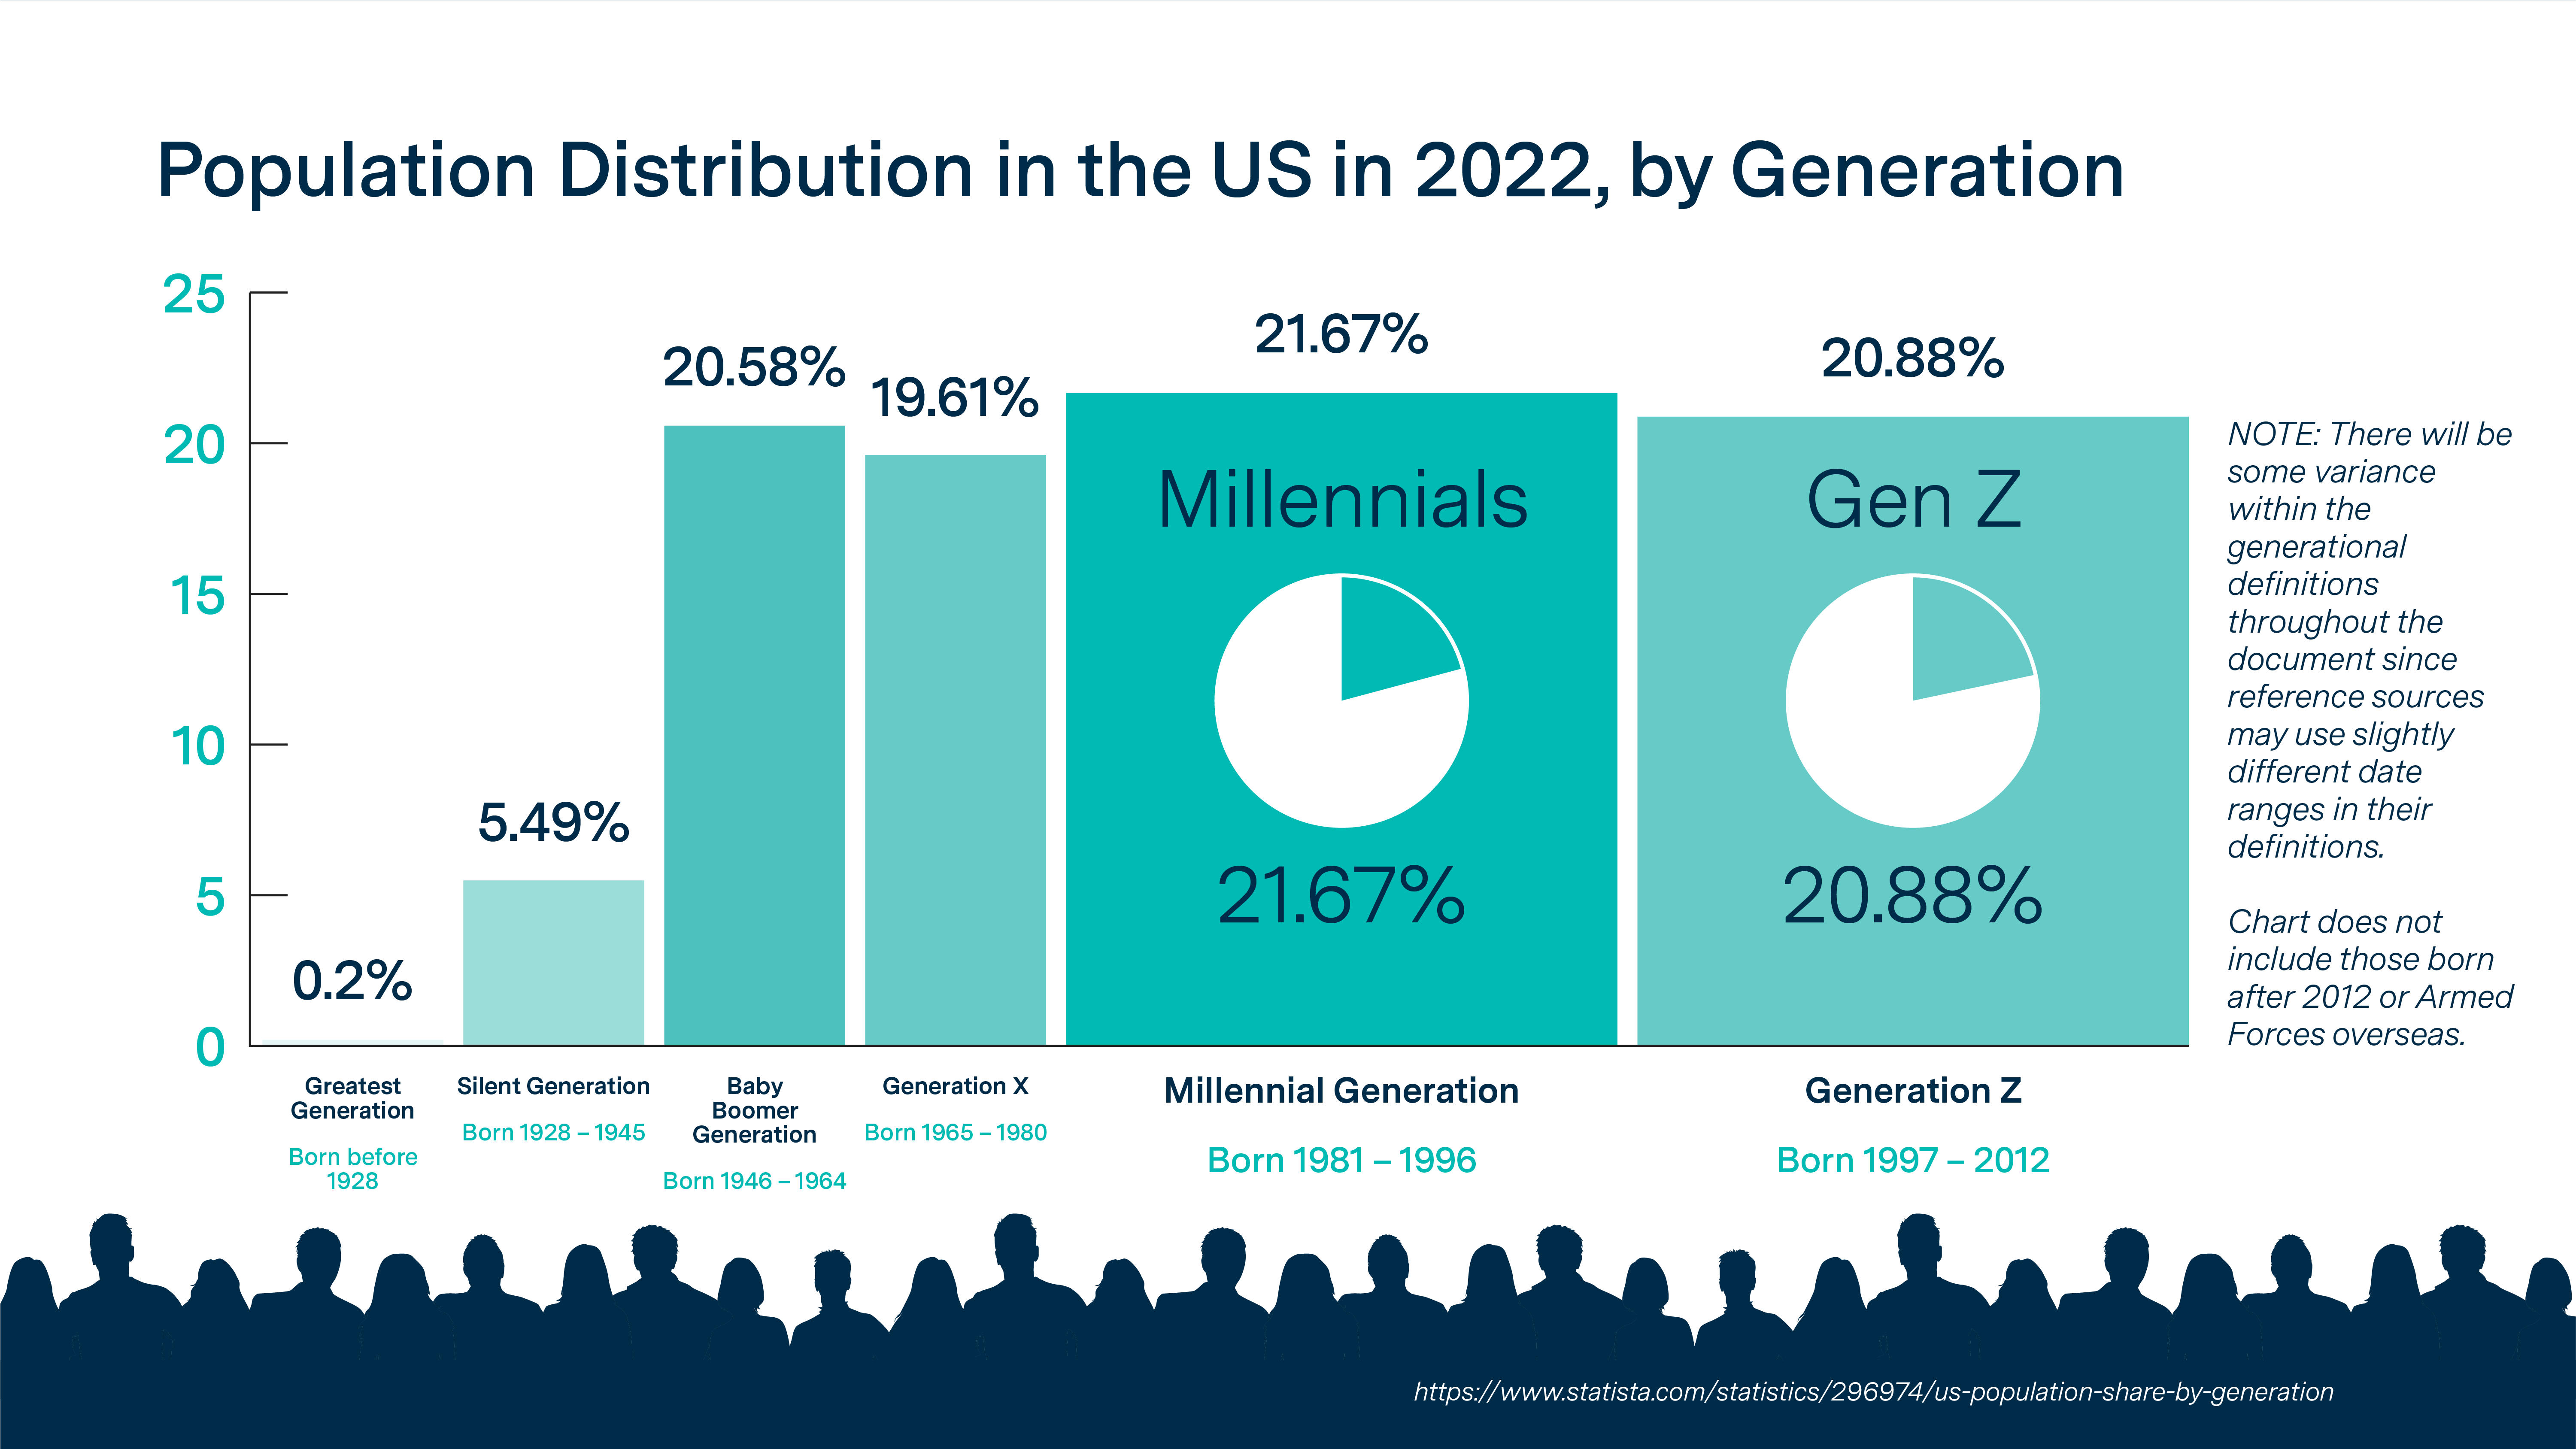 Population distribution in the US in 2022 by generation